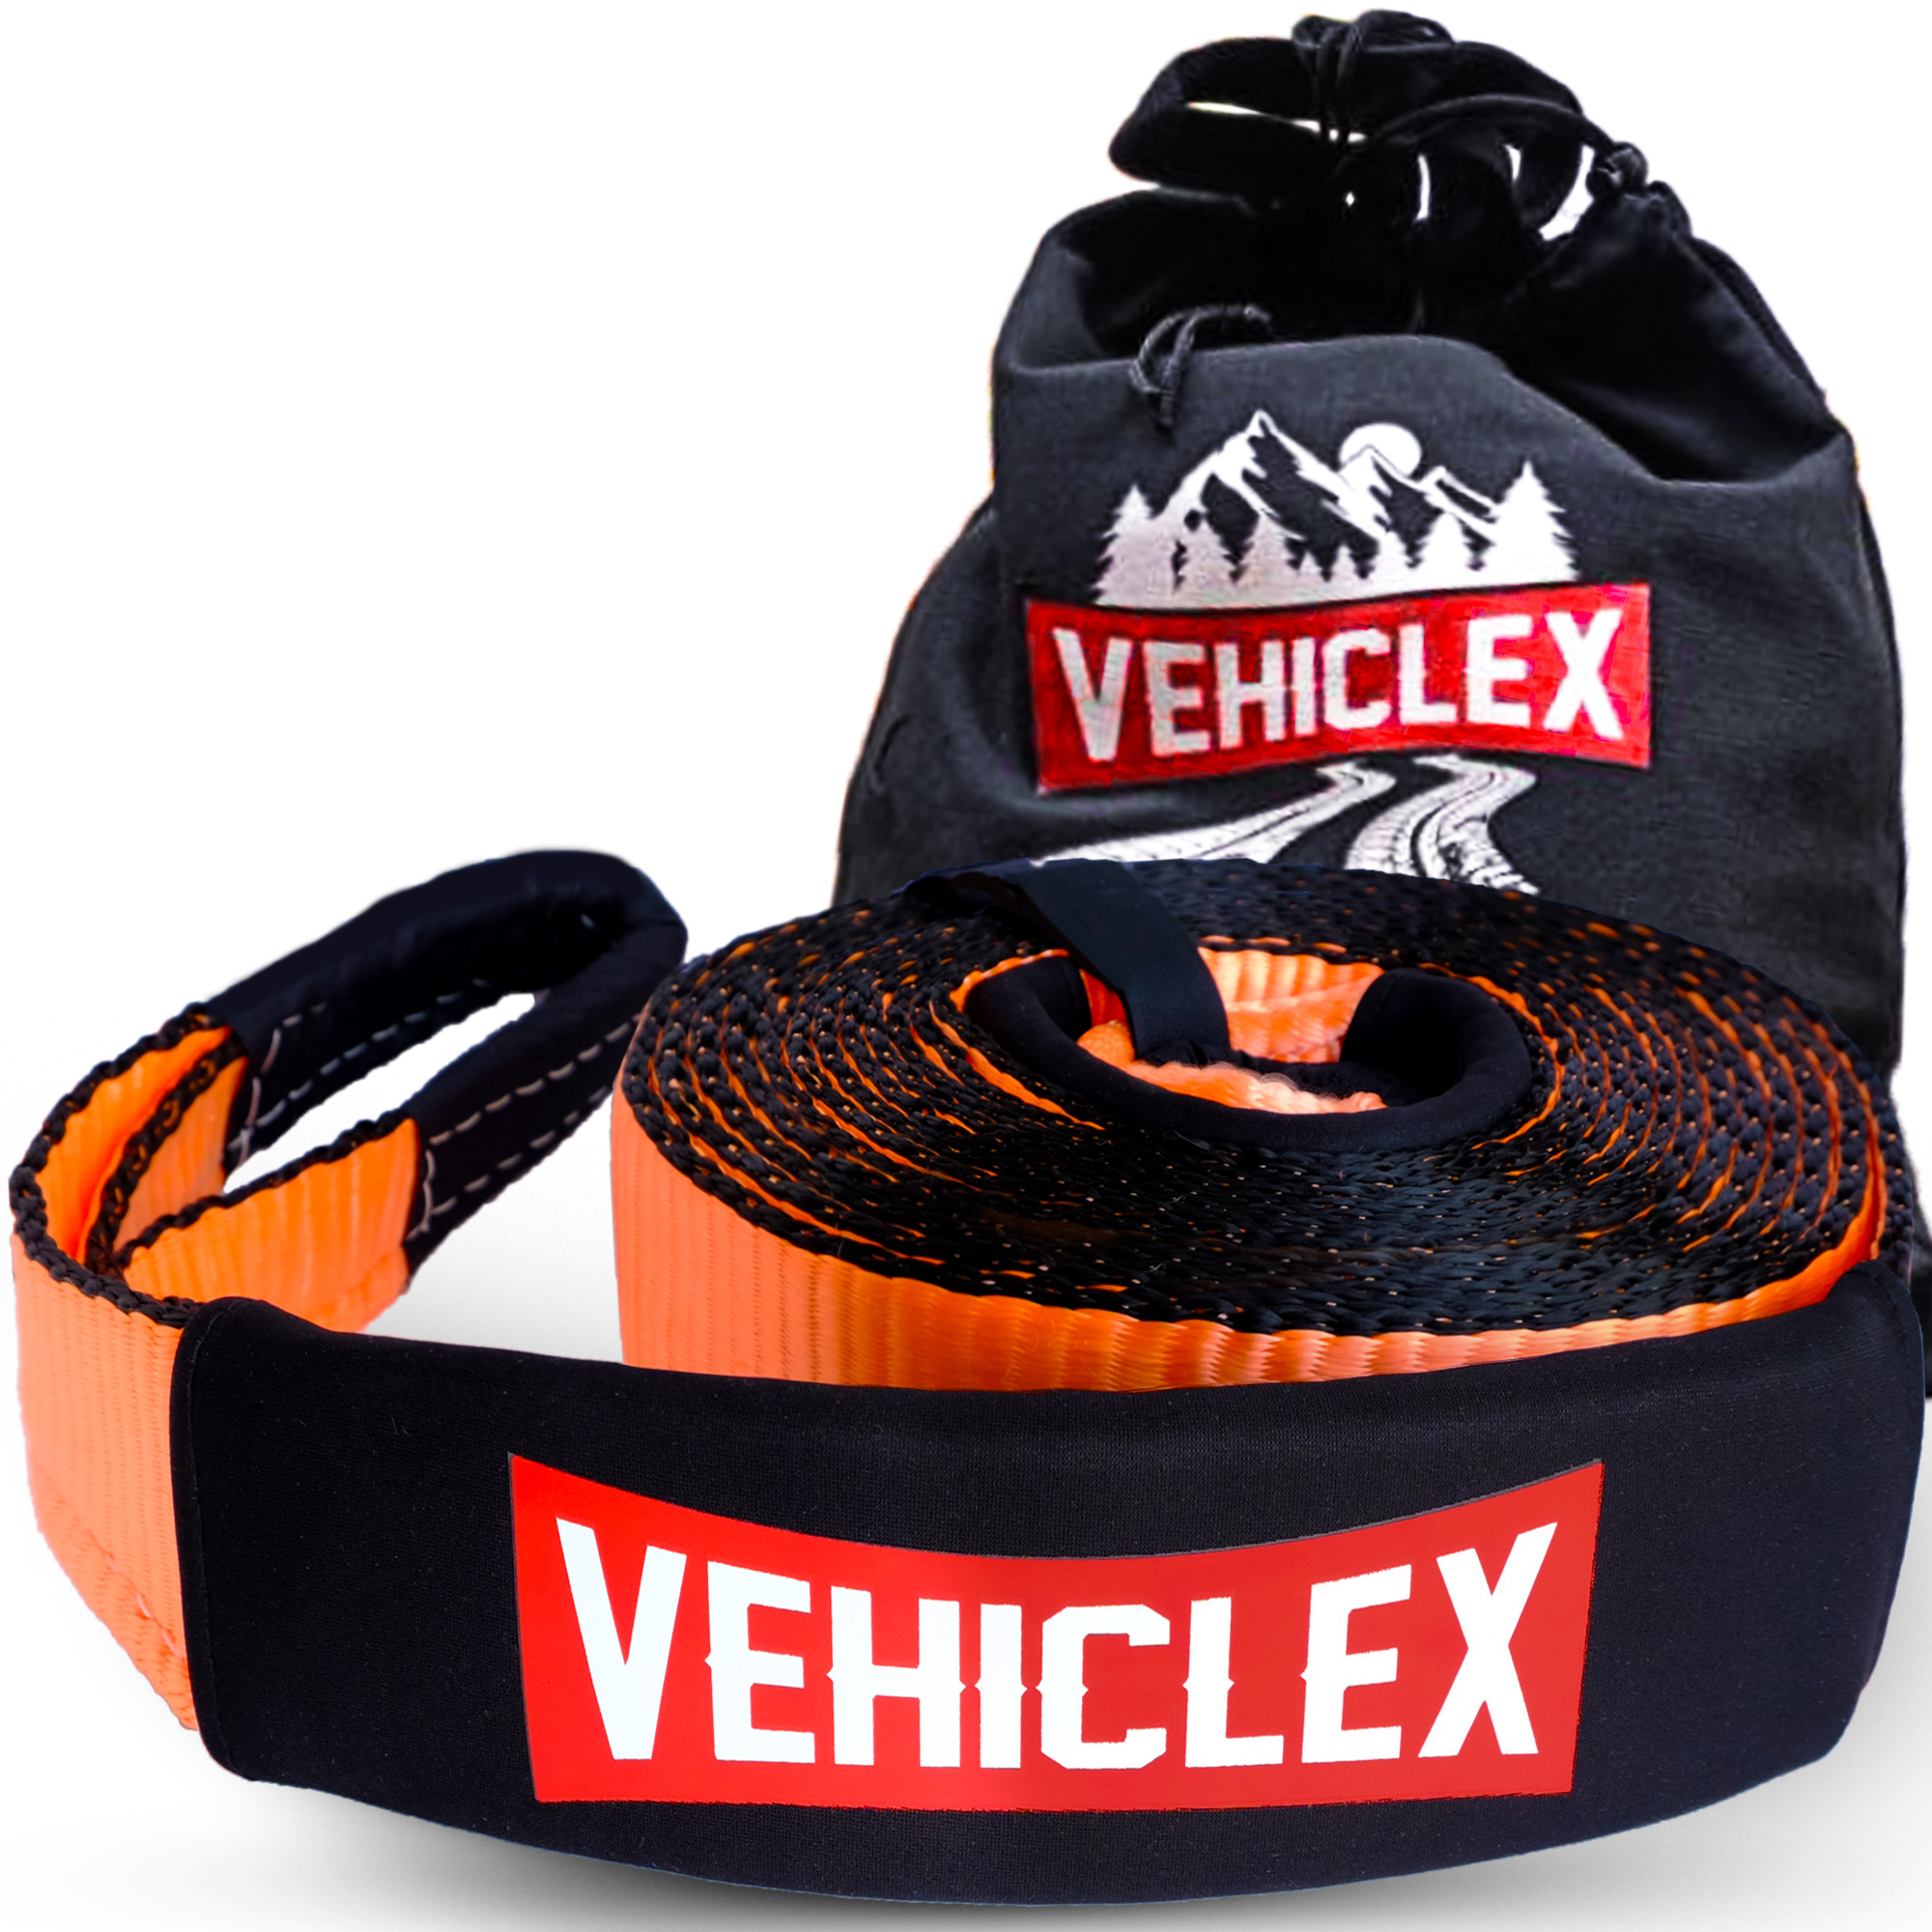 High Visibility Industrial Grade Webbing Truck Towing Accessory Vehiclex 3 x 30' All Terrain Tow Recovery Strap 35000lbs Break Strength Protective Sleeves Reinforced Loops Storage Bag 